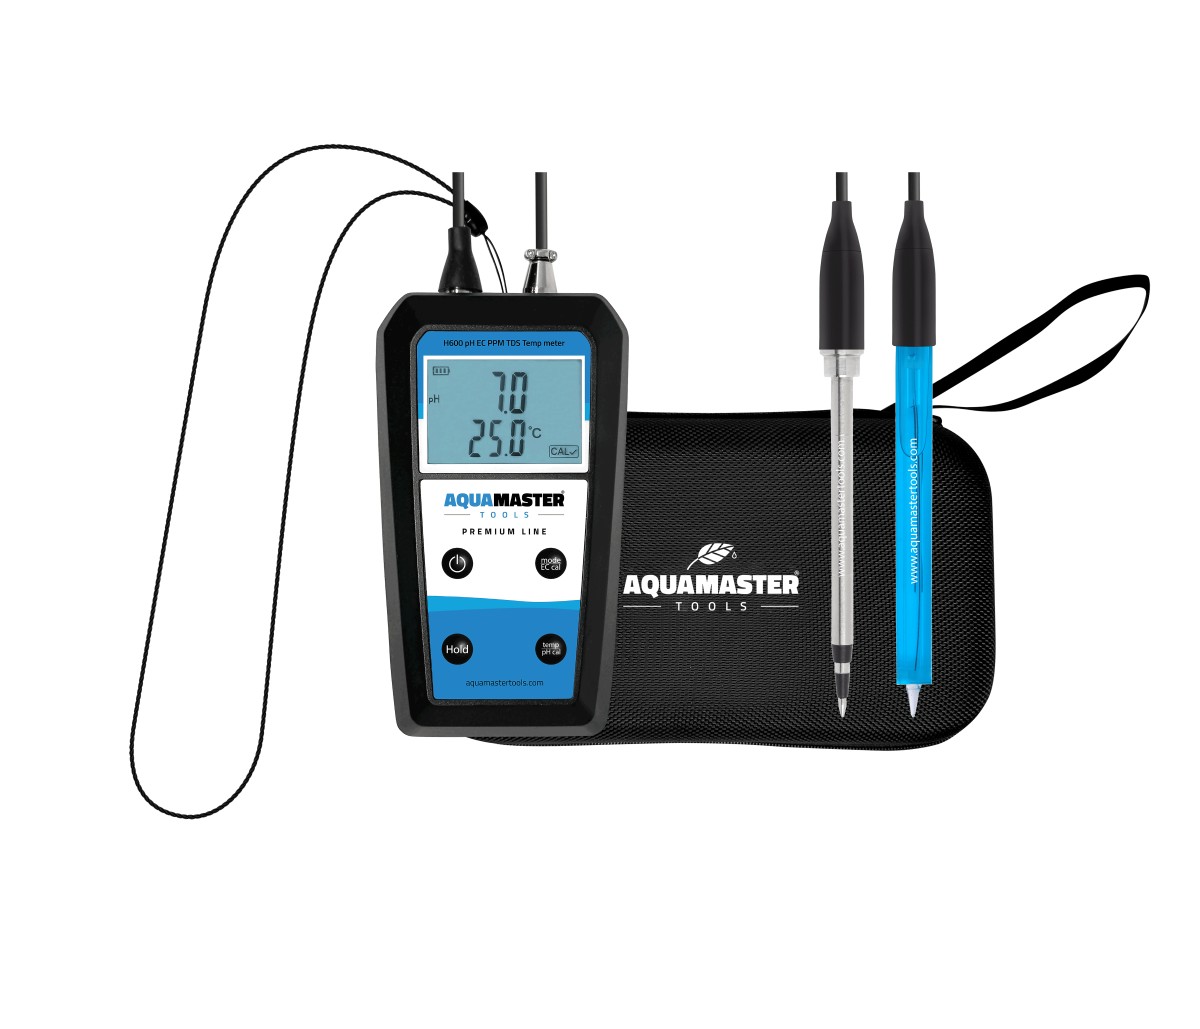 h600 prohandheld substrate meter